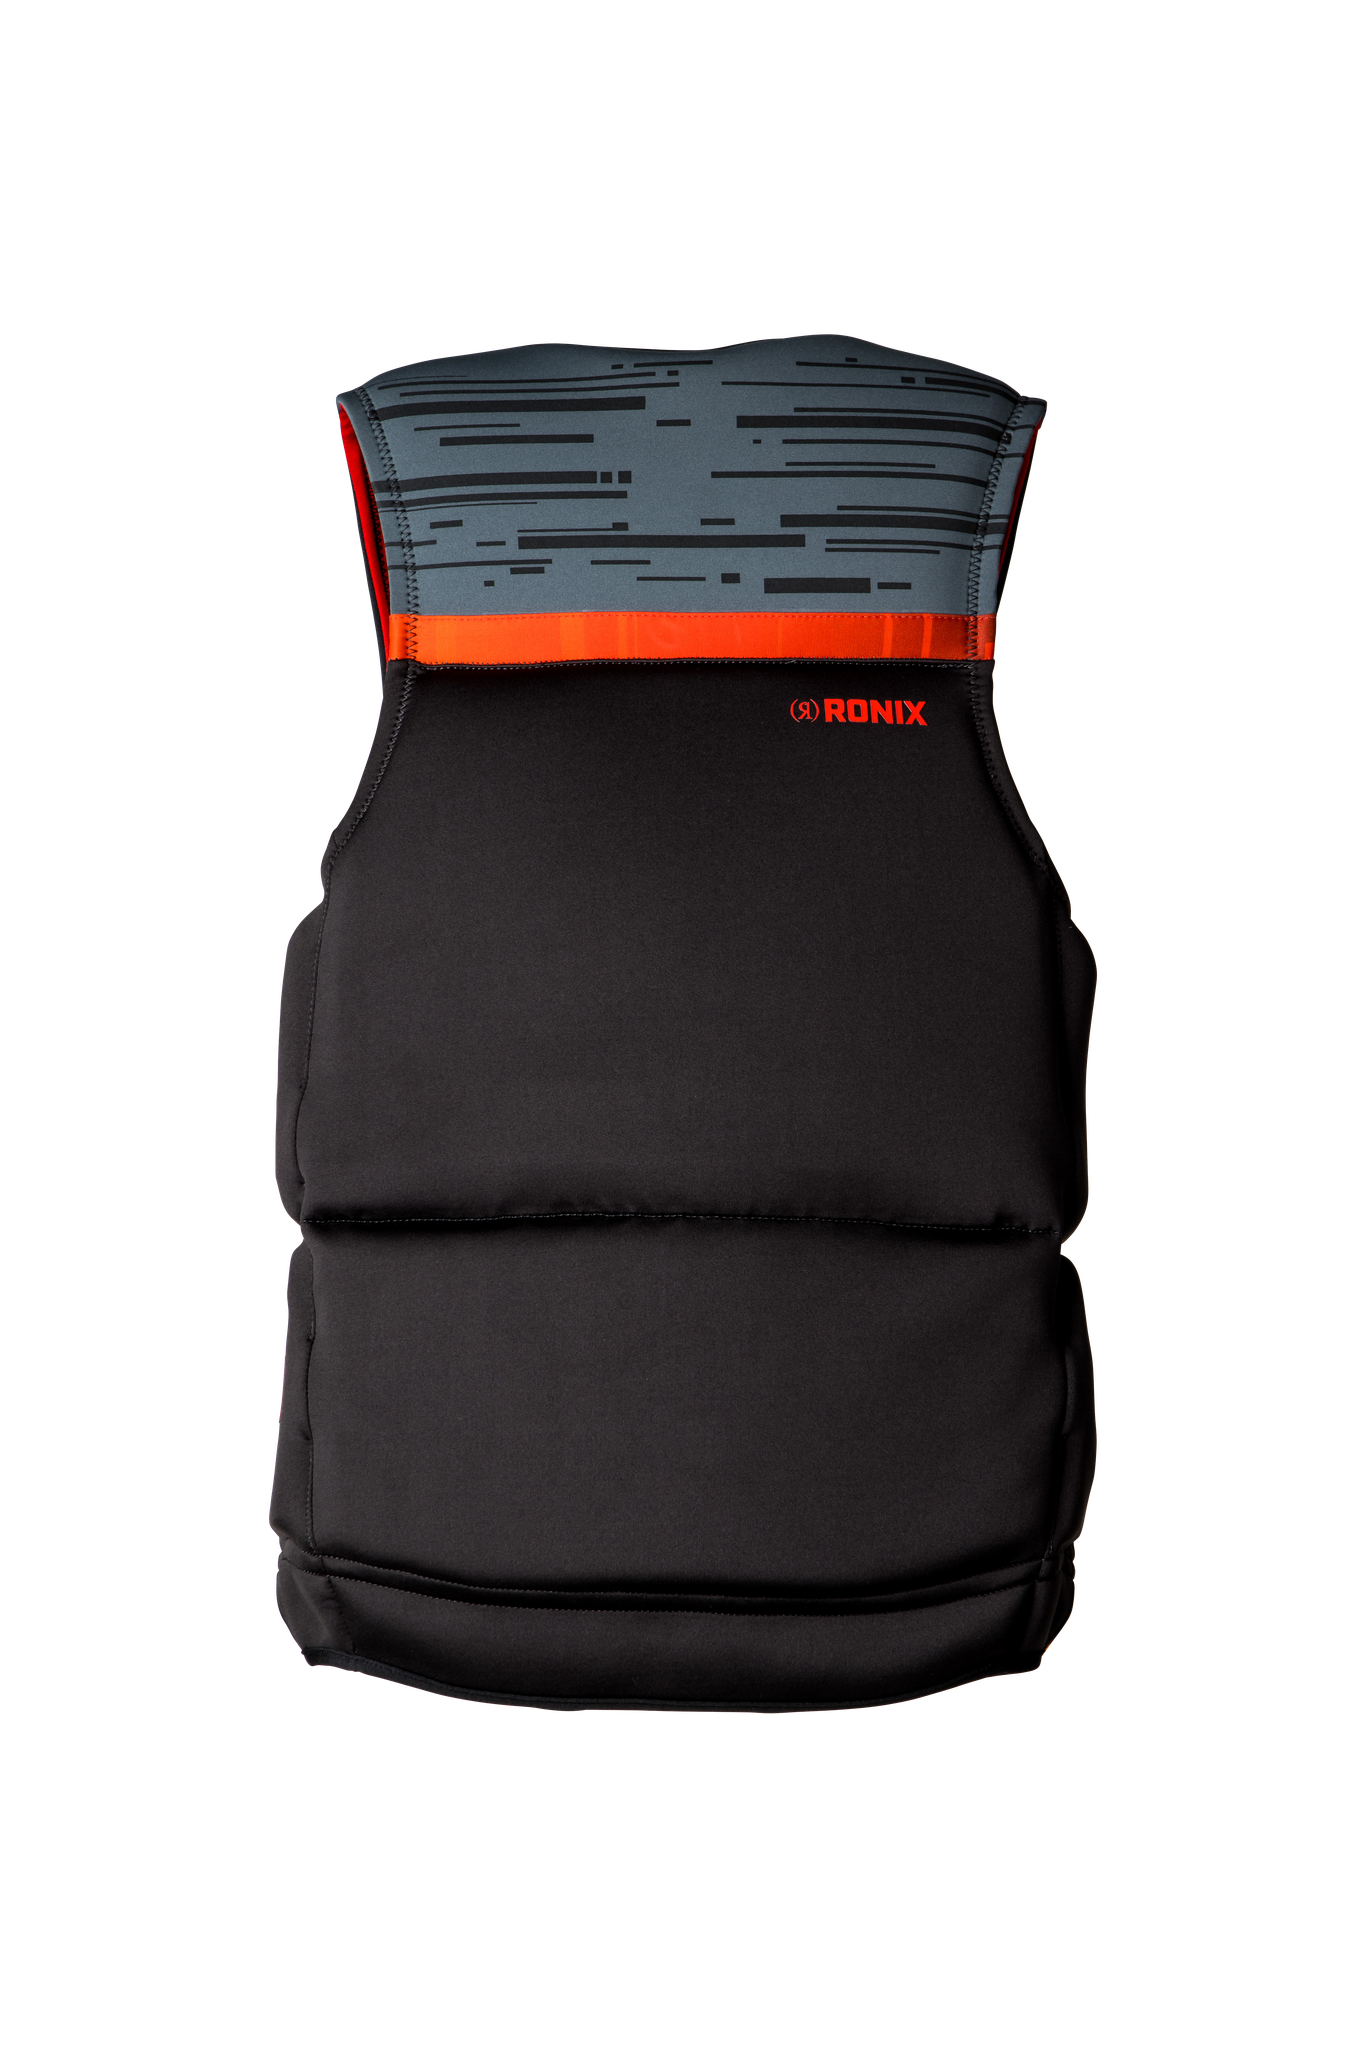 A Ronix Megacorp Capella 3.0 Men's CGA Vest with oversized arm holes on a black background.